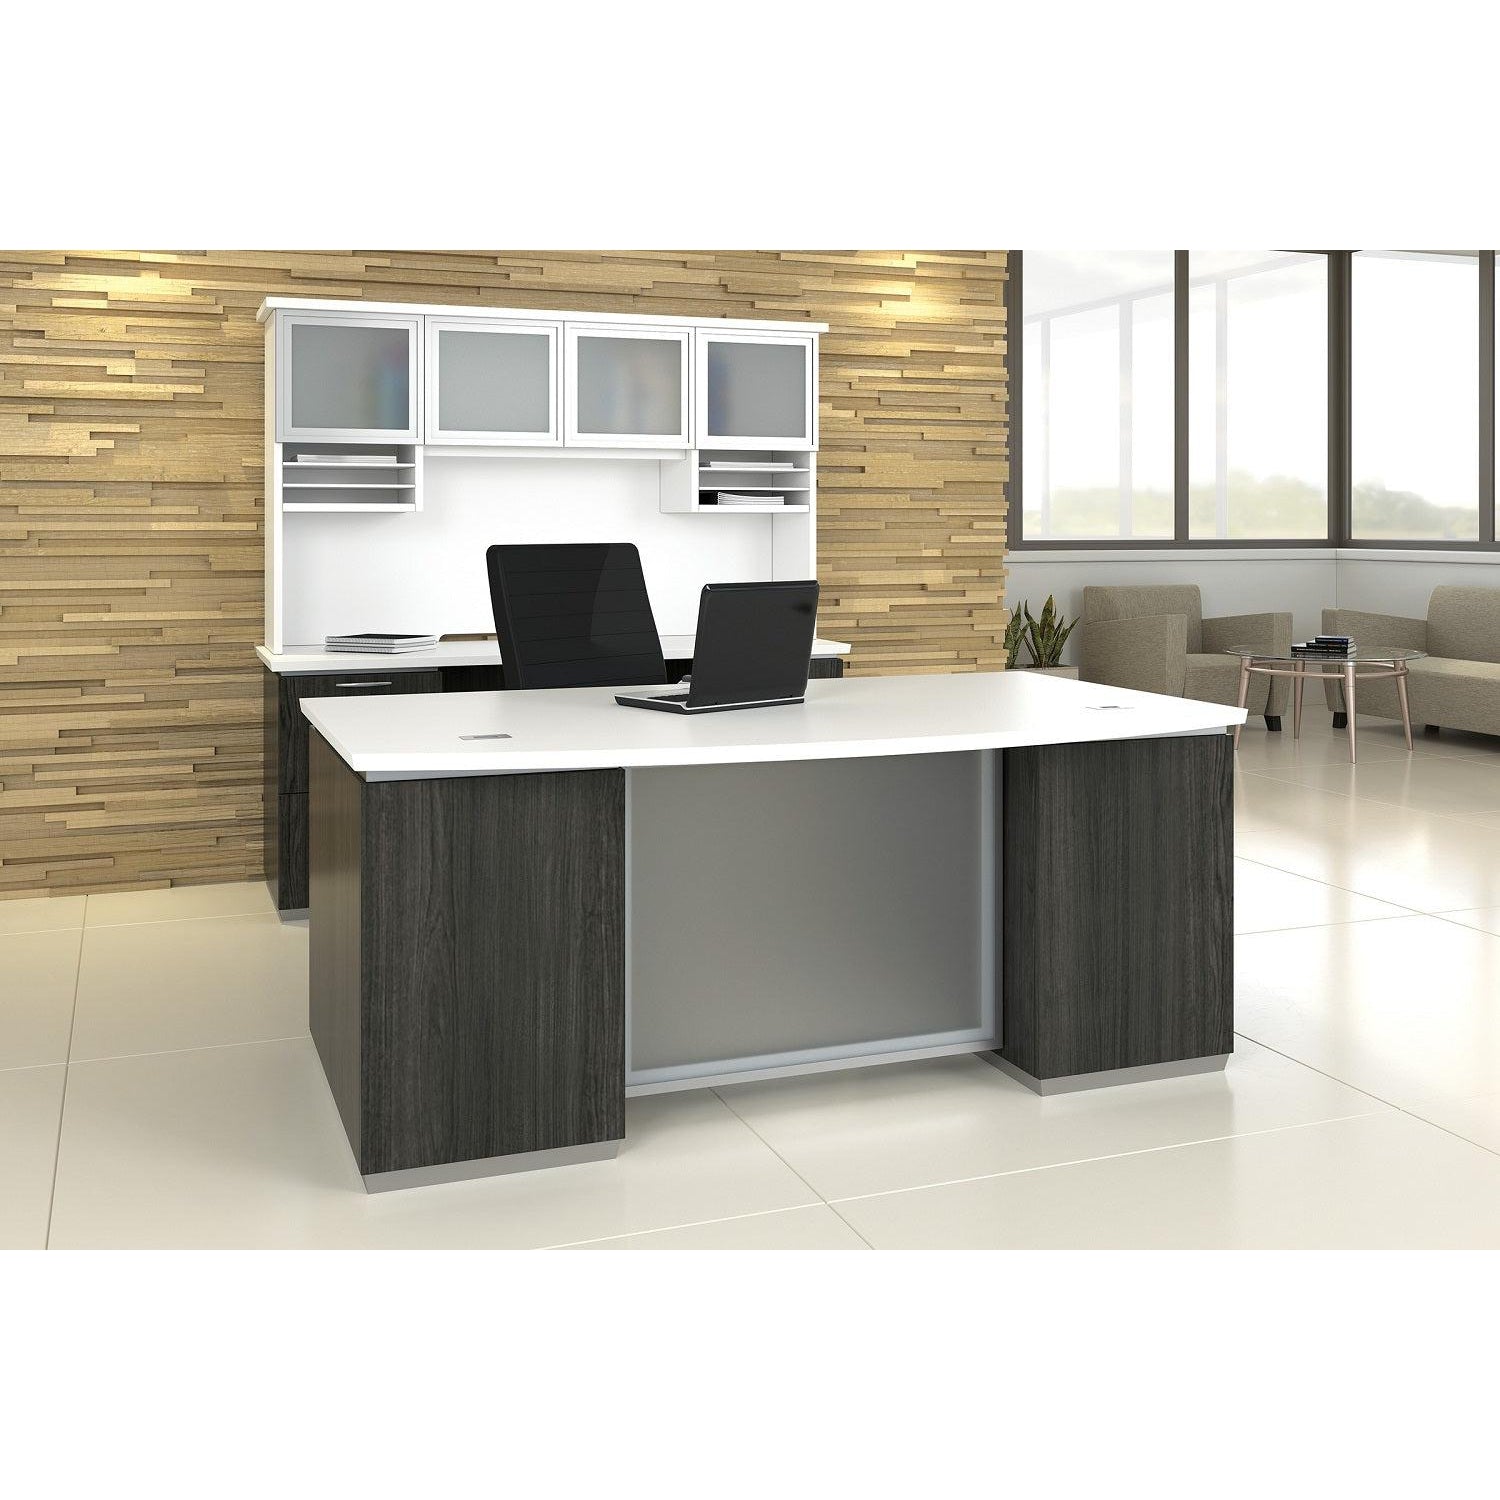 "Tuxedo White" Bow Front Double Pedestal Desk with Credenza and Glass Door Hutch, White Tops with Slate Grey Bases, White Hutch